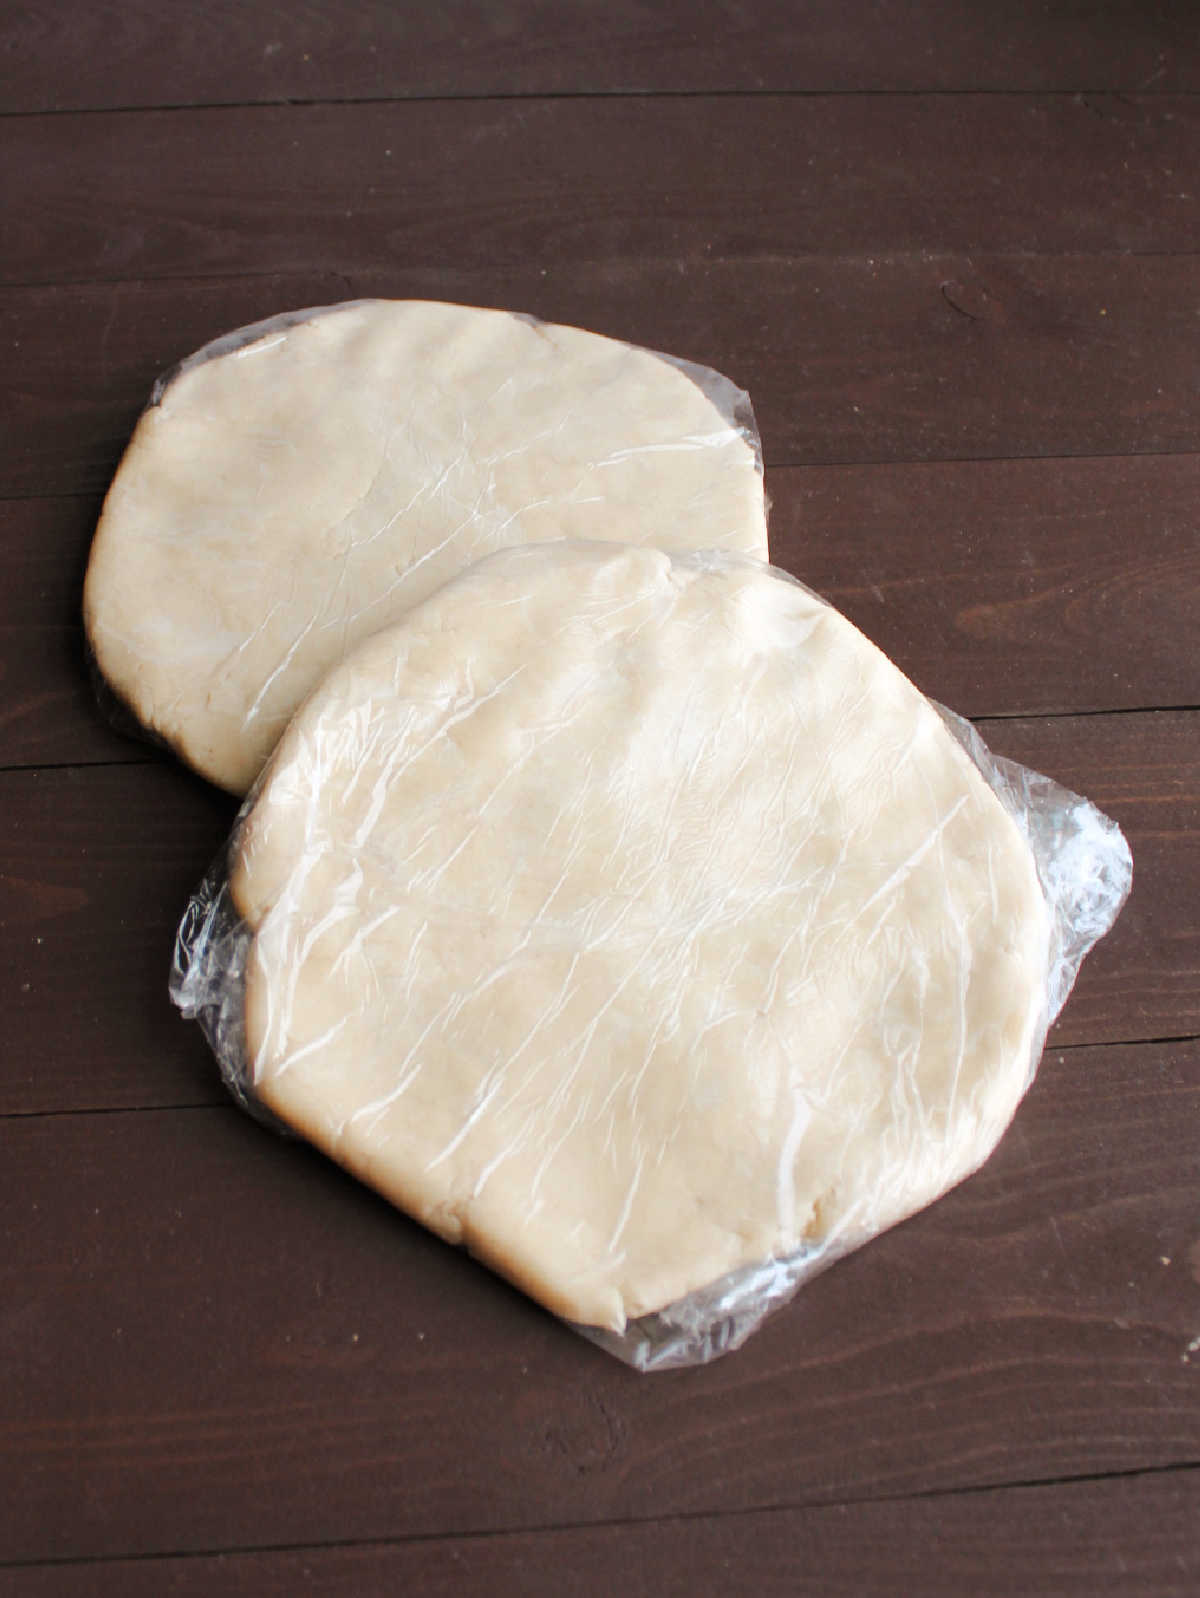 disks of pie crust dough wrapped in plastic wrap to chill.